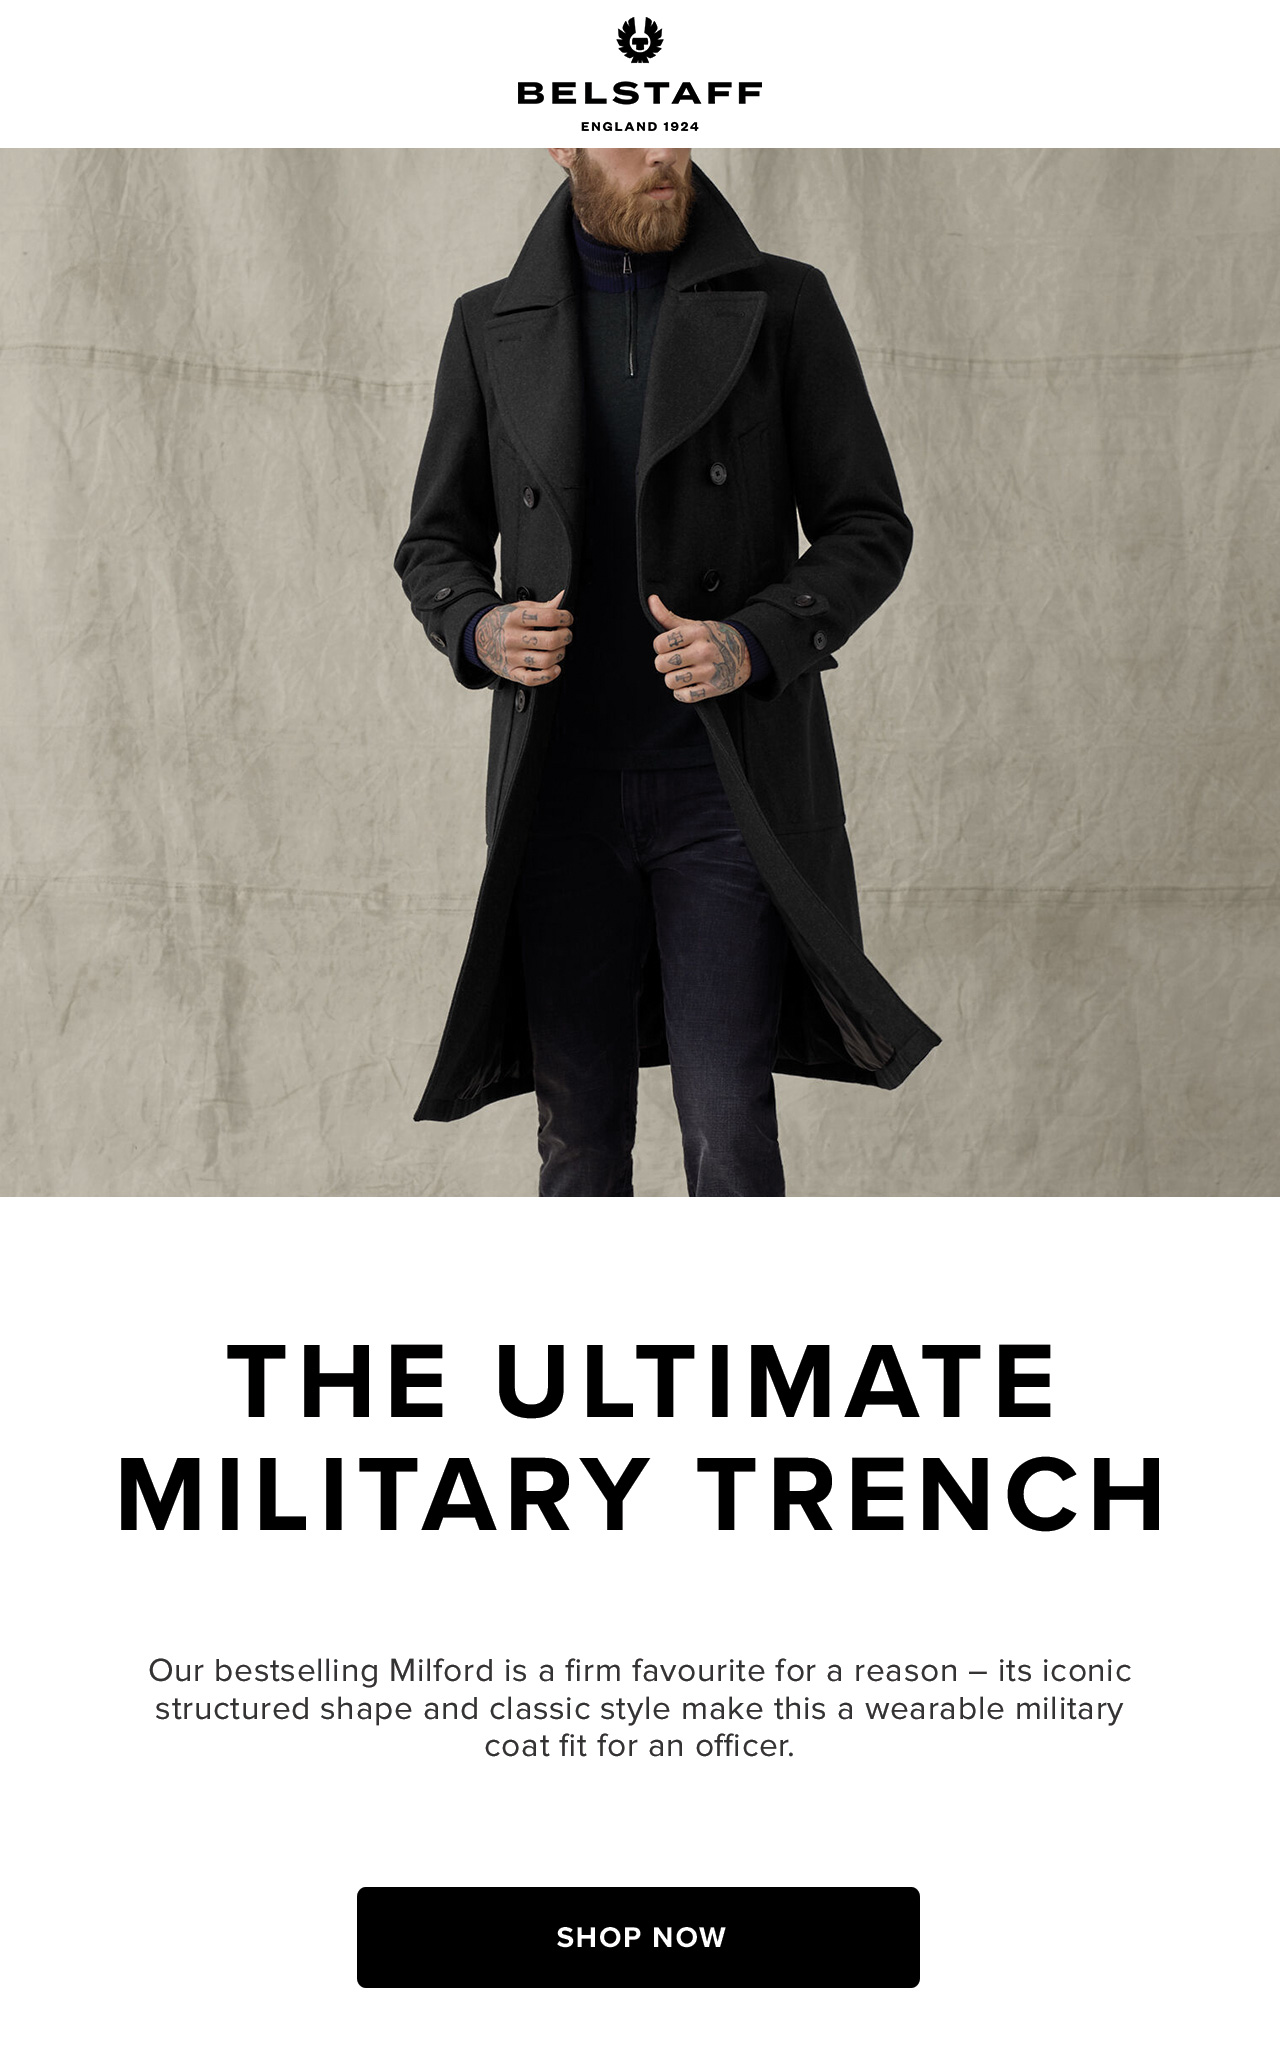 Our bestselling Milford is a firm favourite for a reason - its iconic structured shape and classic style make this wearable military coat an outer fit for an officer.